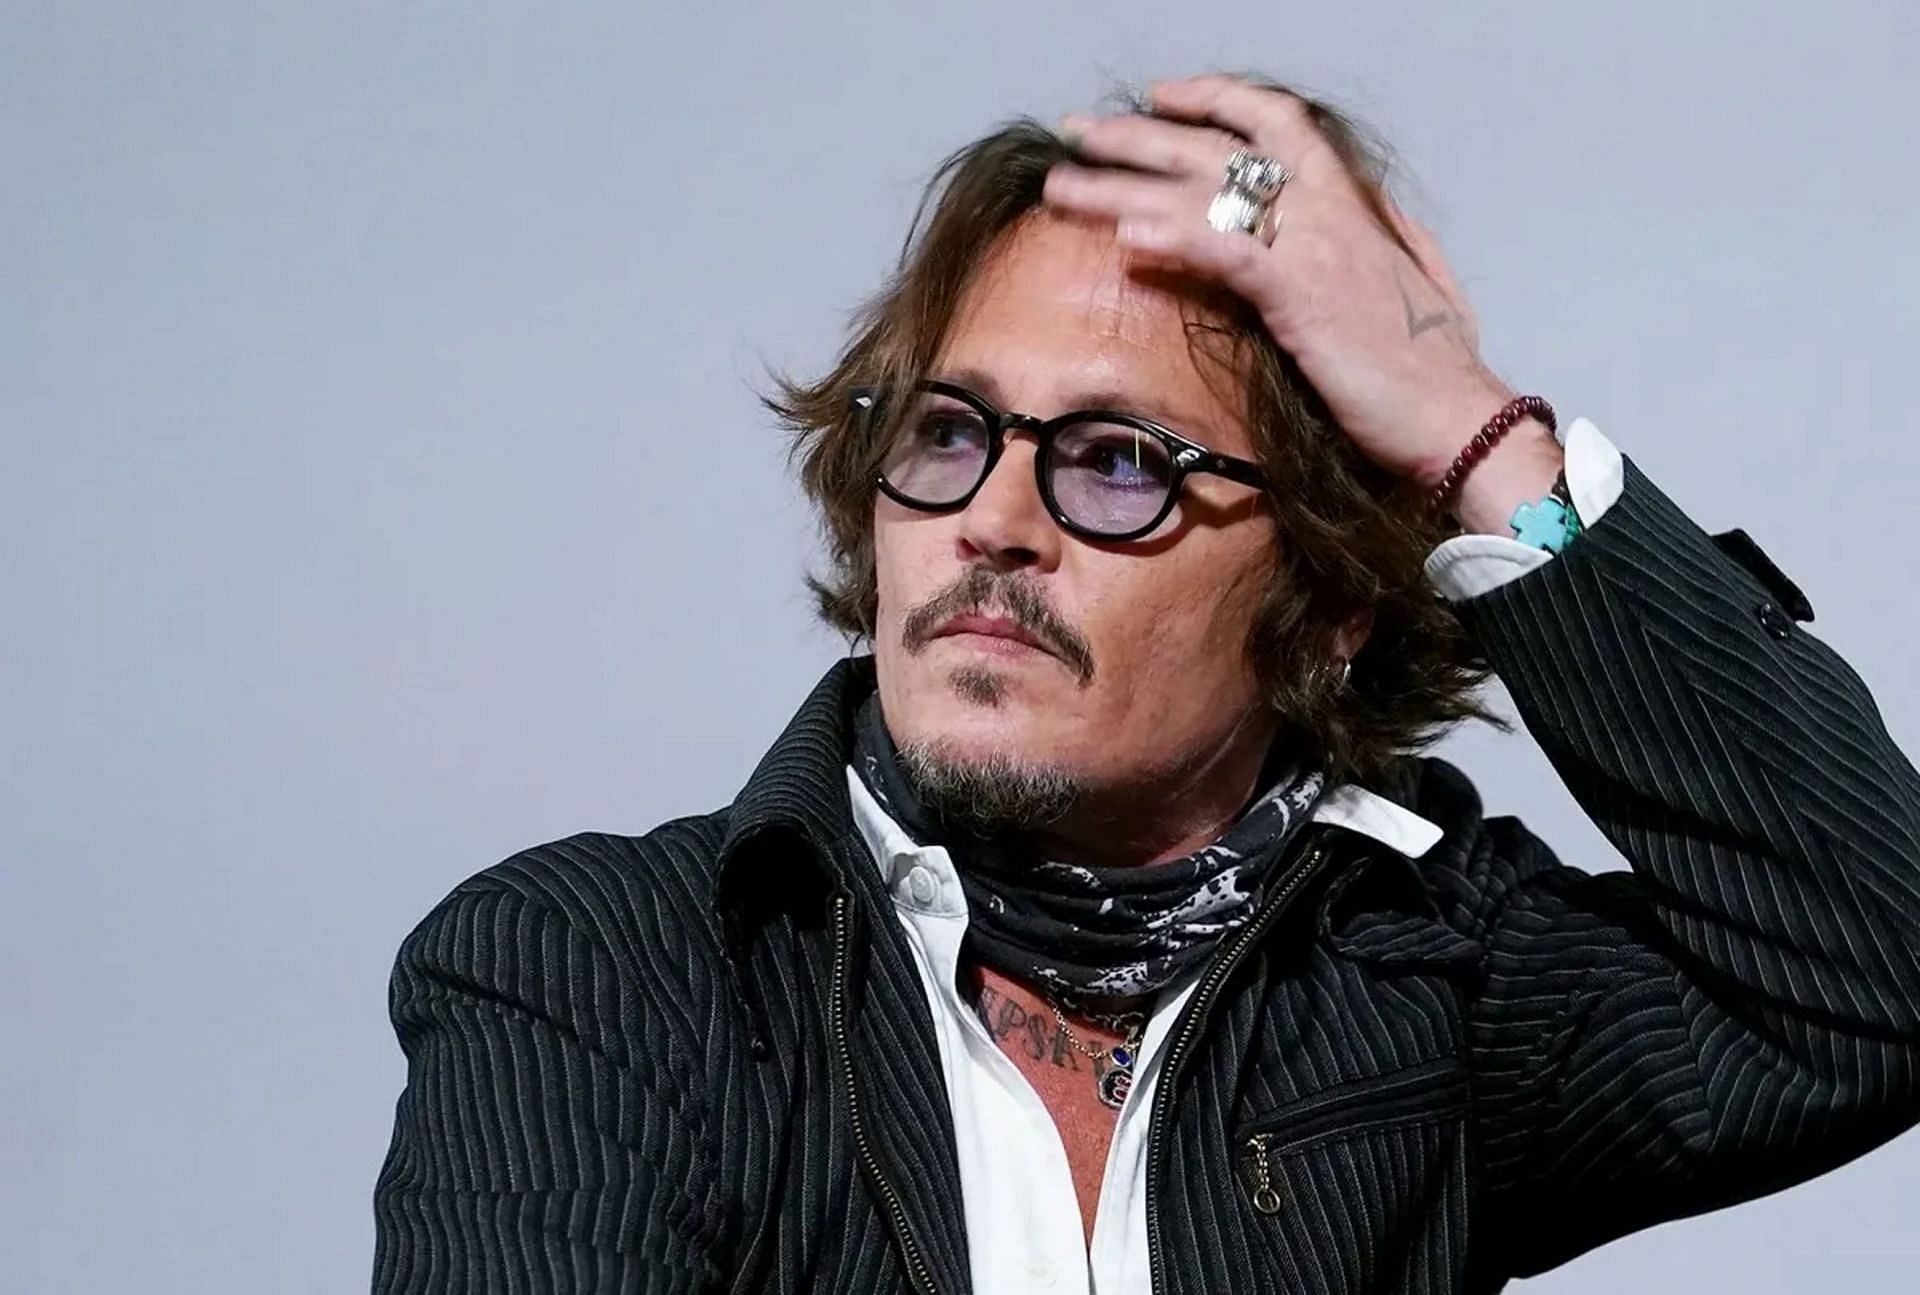 Fans shocked as Johnny Depp reveals he has a Discord account. (Image via Thomas Niedermueller/ZTF/Getty Images)